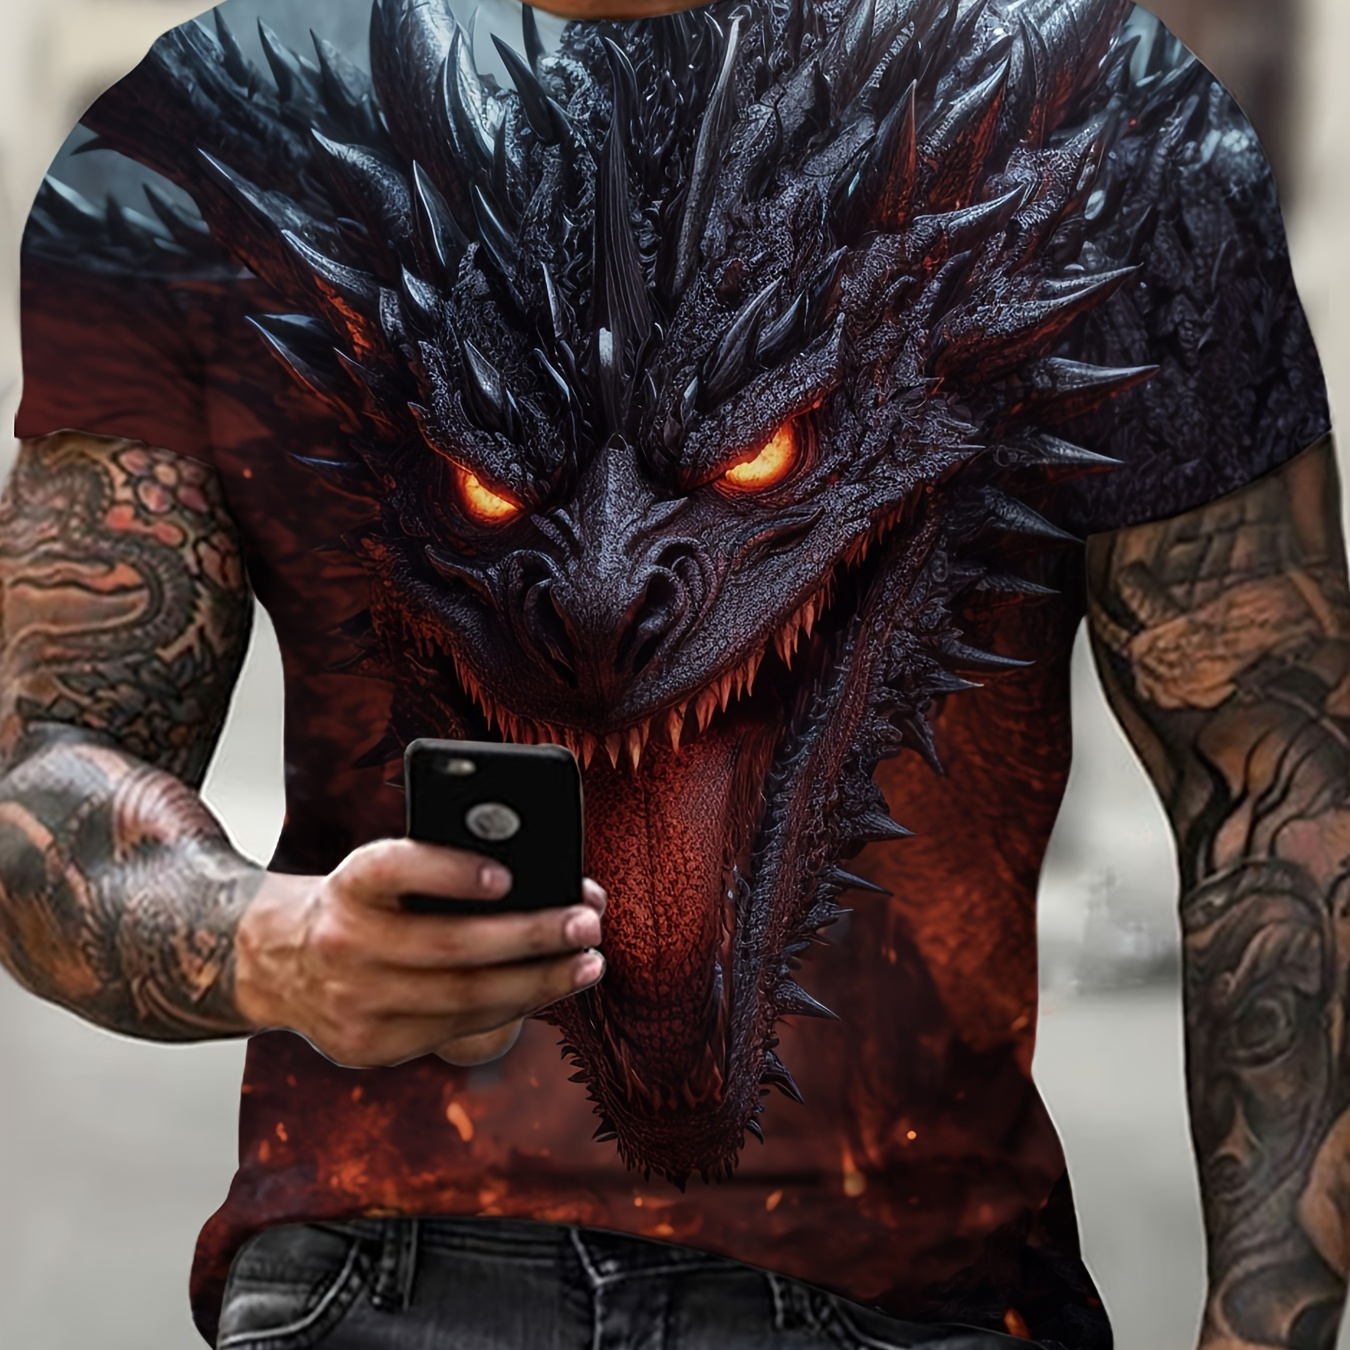 

Plus Size Men's 3d Monster Graphic Print T-shirt Summer Short Sleeve Tees For Big & Tall Males, Men's Clothing